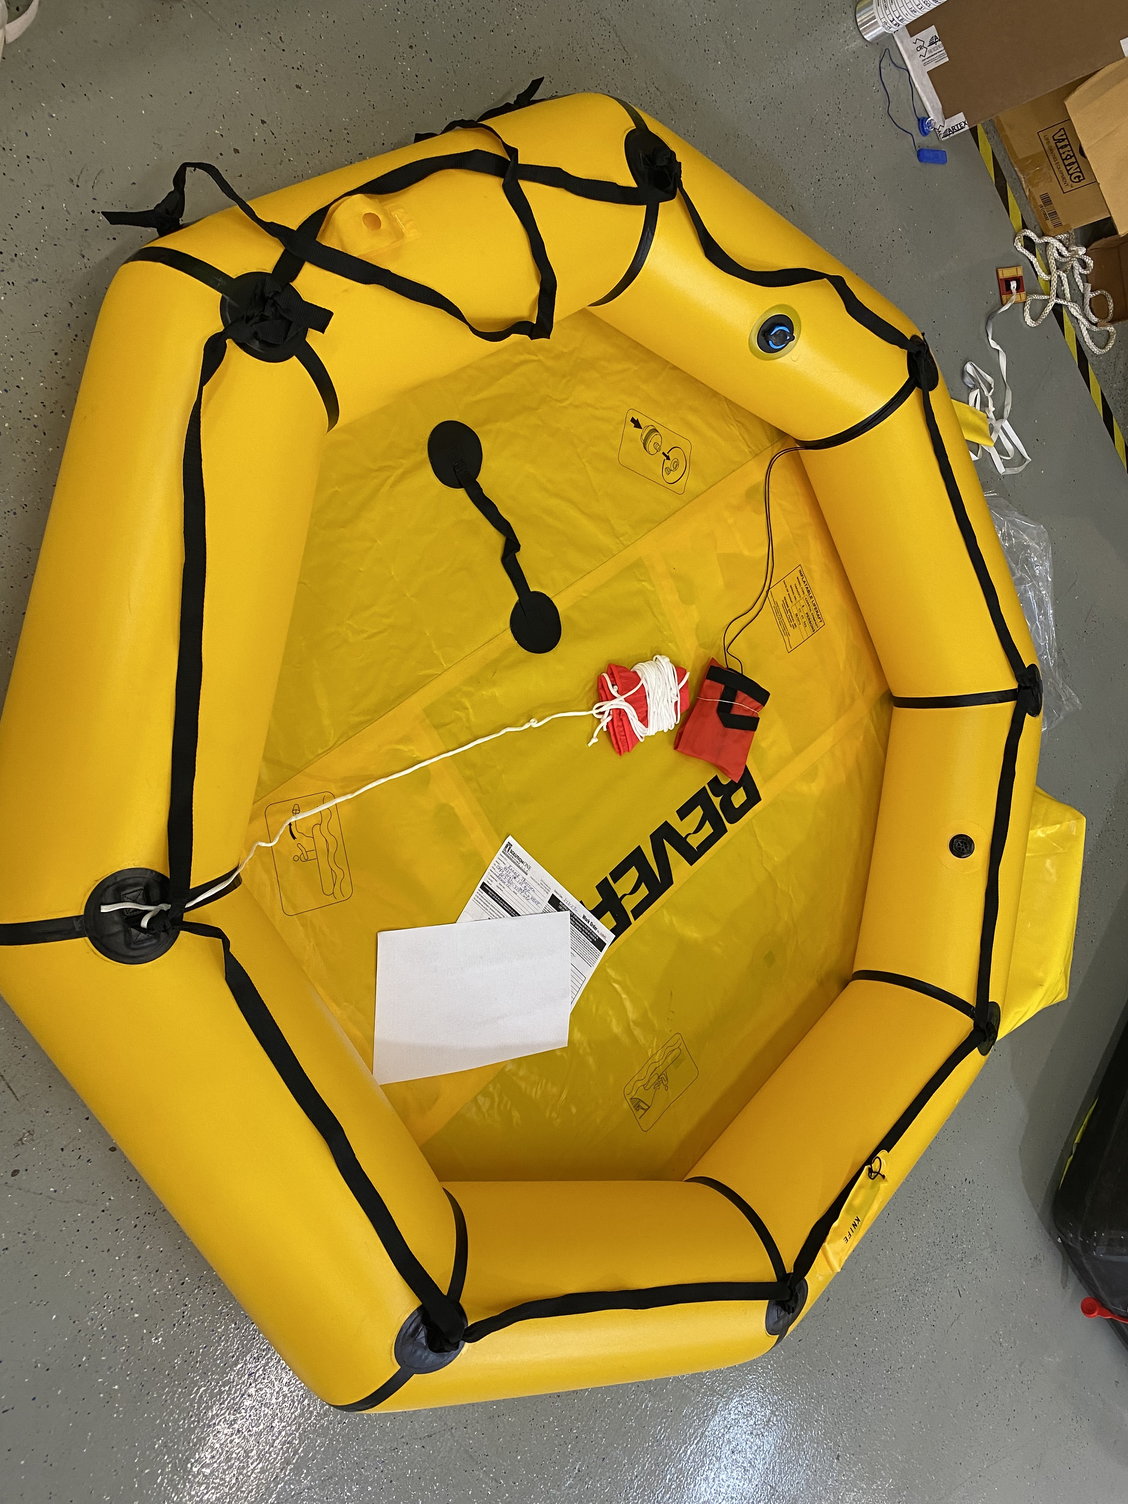 Life rafts learned a lot today - The Hull Truth - Boating and